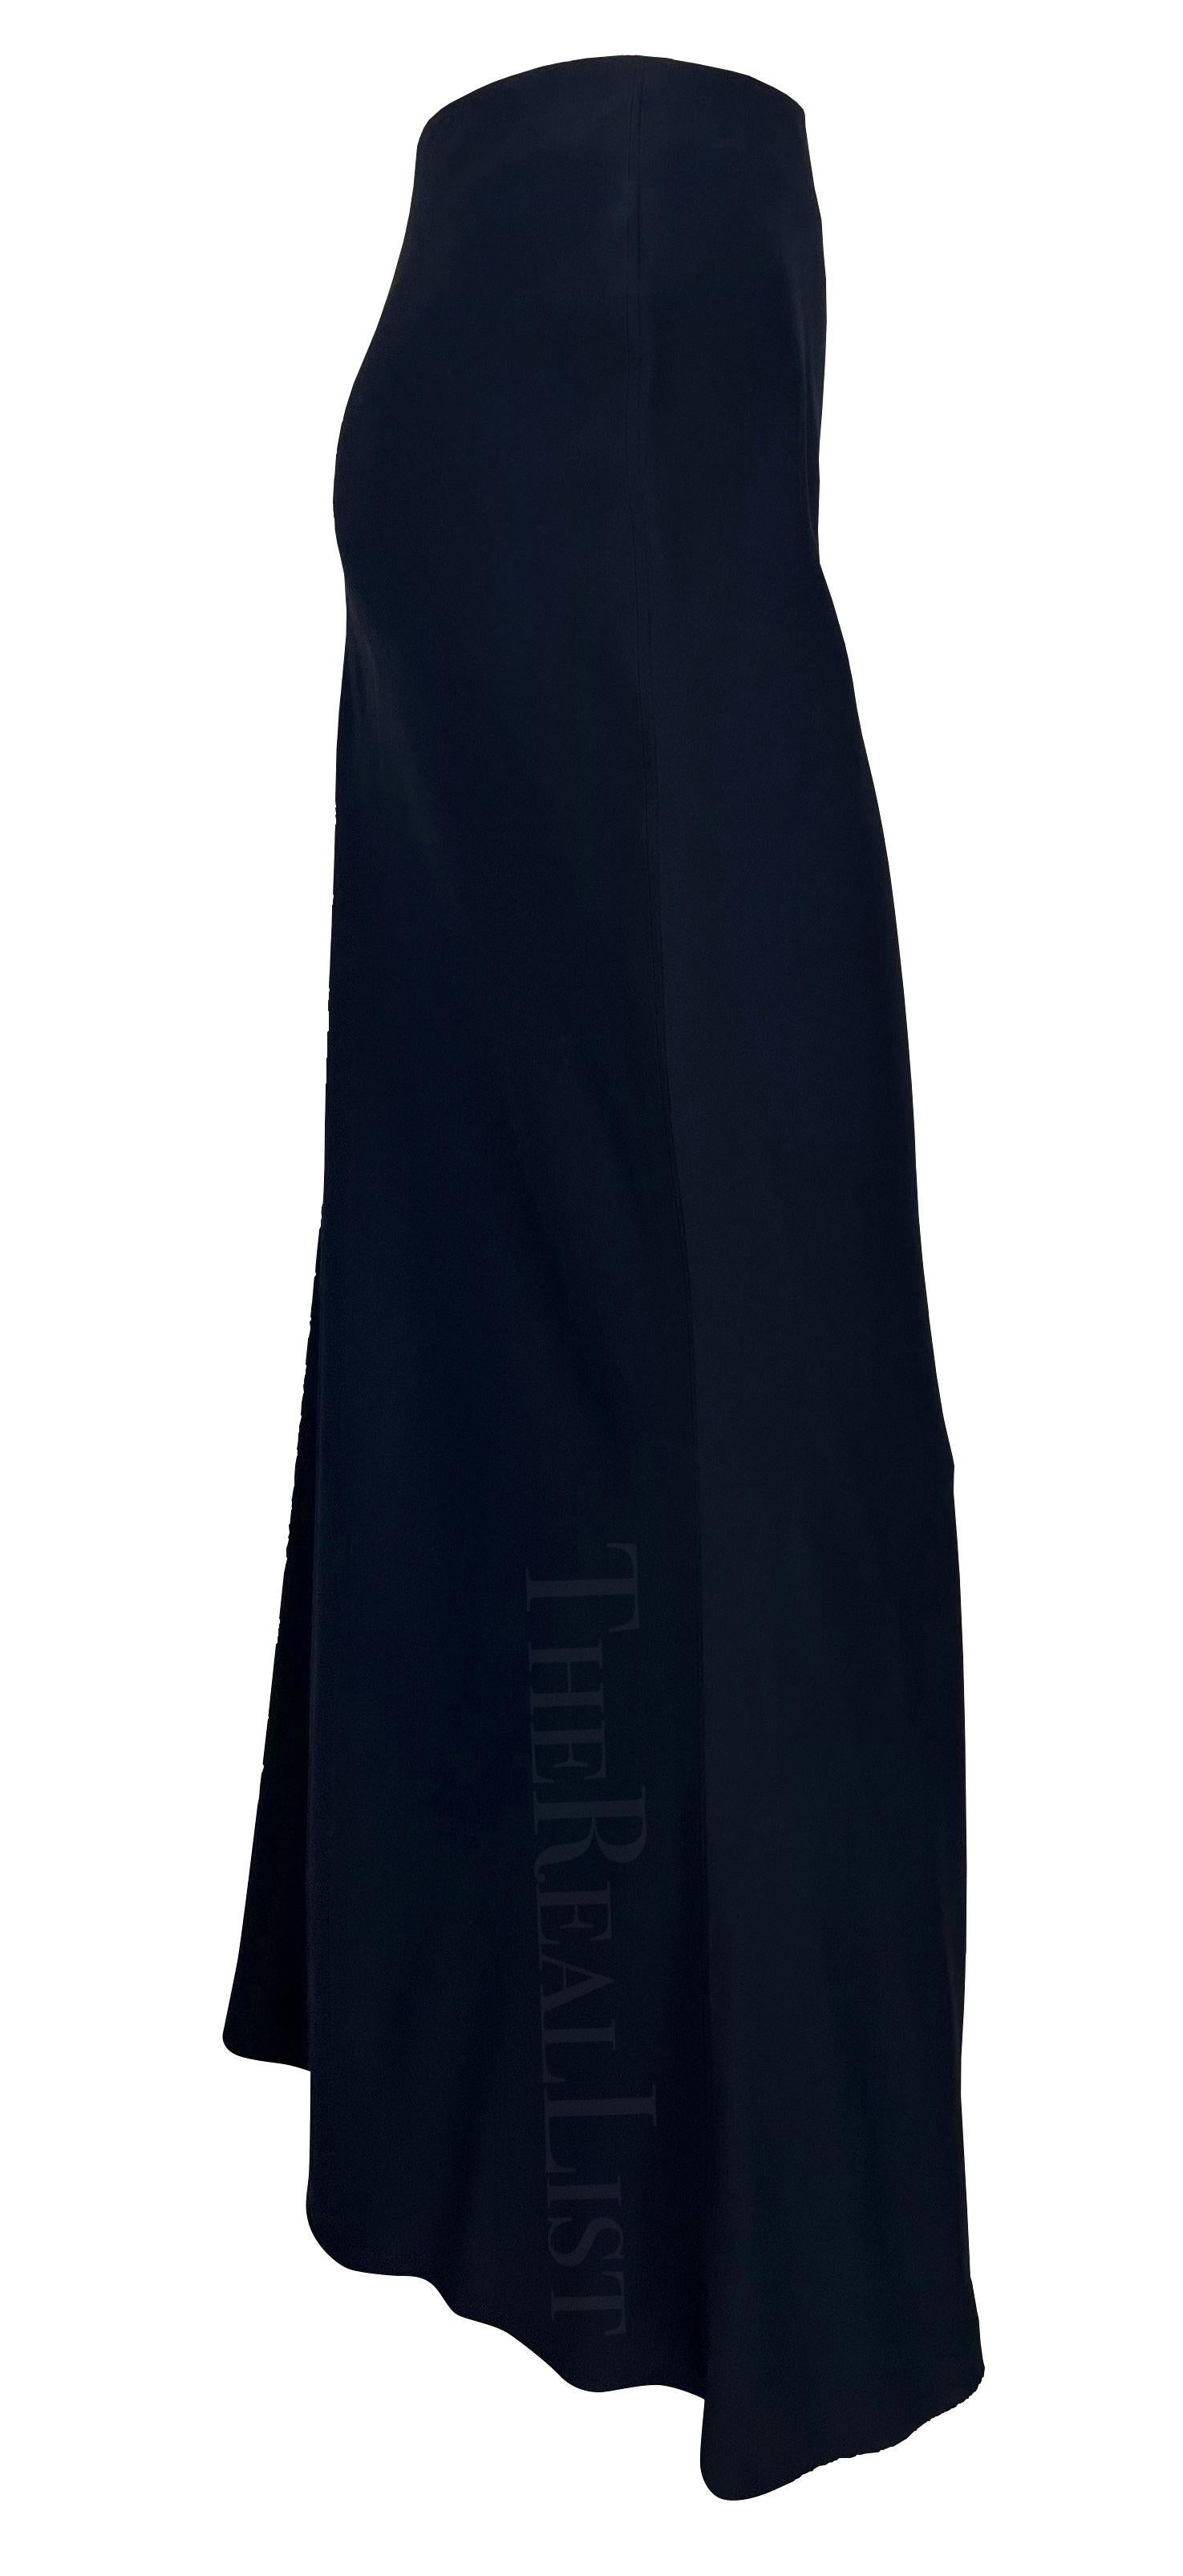 NWT S/S 1996 Gucci by Tom Ford Navy Bodycon Stretch Maxi Skirt For Sale 2